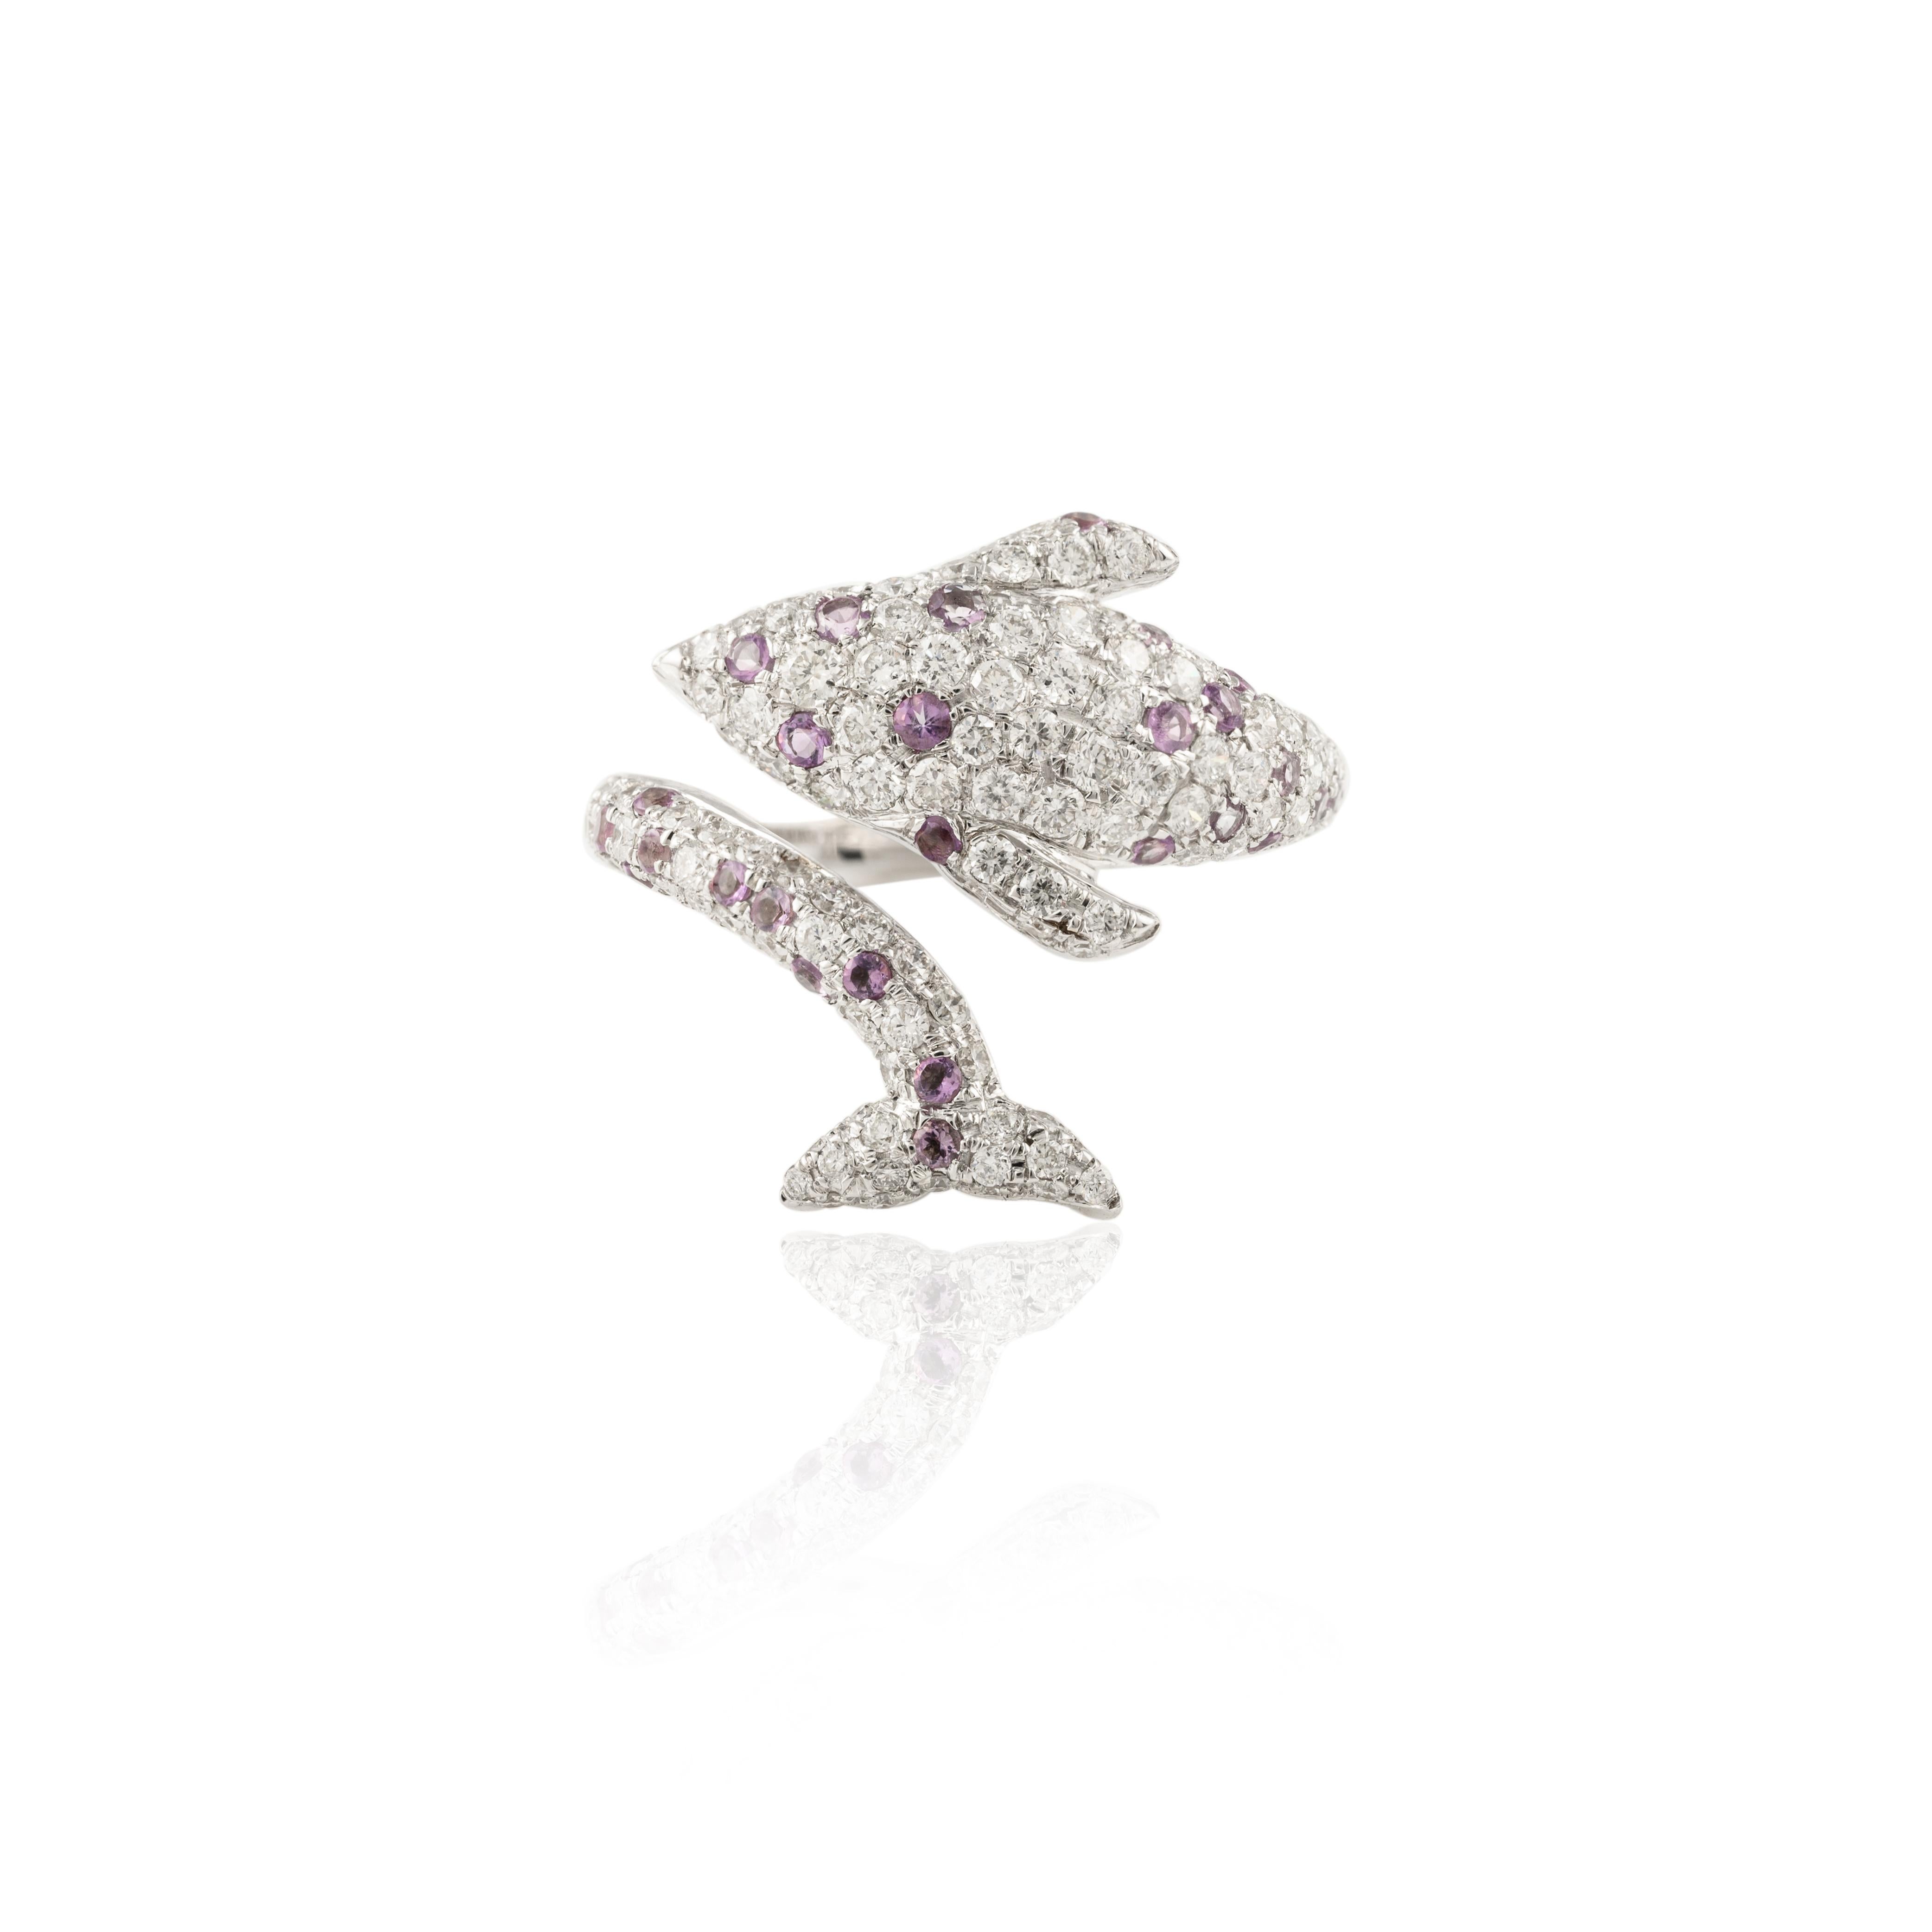 For Sale:  18k Solid White Gold Pave Set Amethyst and Diamond Dolphin Bypass Ring 4